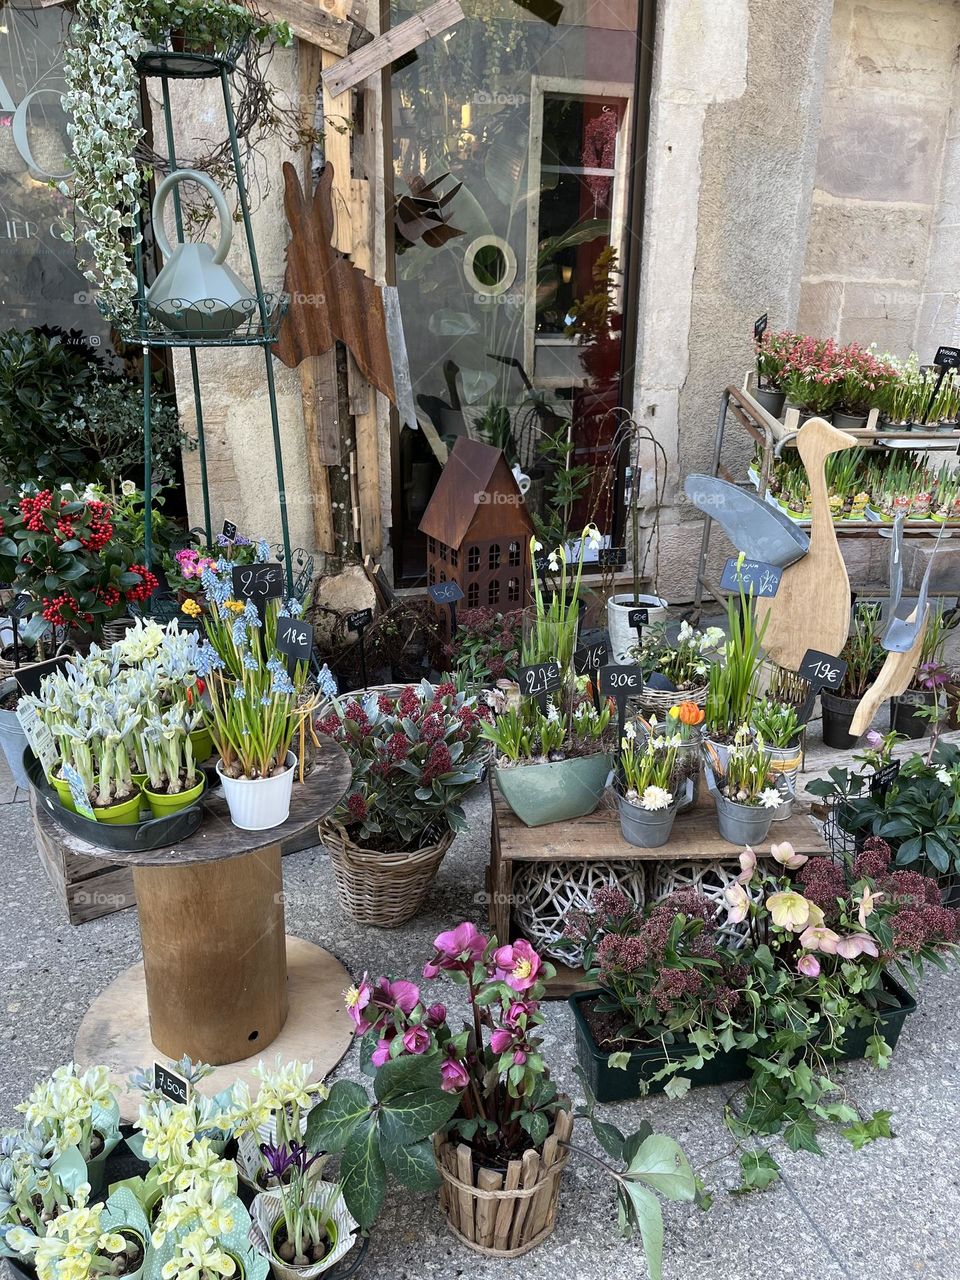 Beautiful flowers in front of a flower shop located in Dijon France.